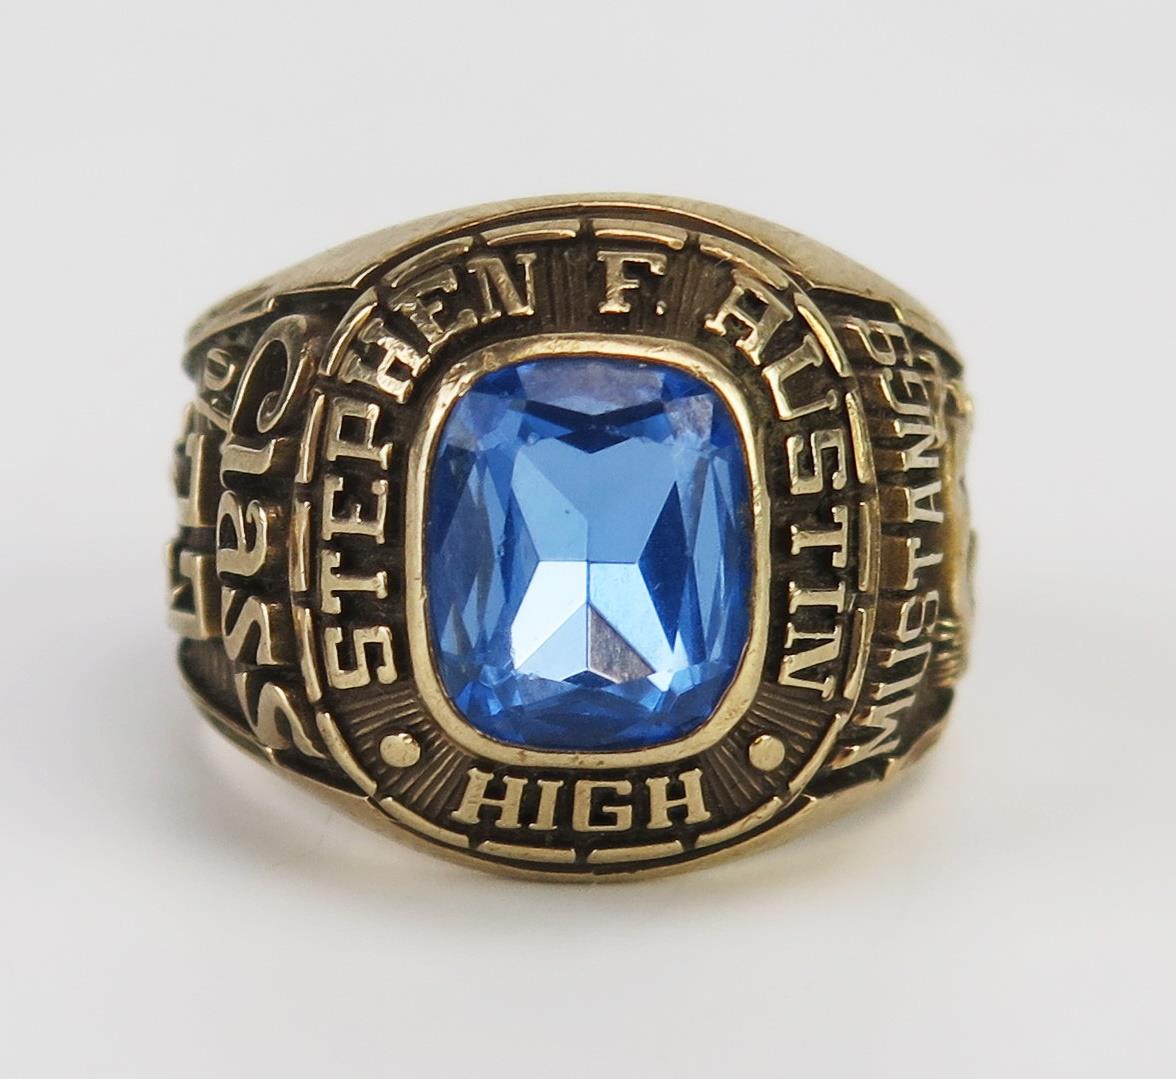 A 10K Gold American College Ring with inset topaz? 'STEPHEN F. AUSTIN HIGHCLASS OF 73 MUSTANGS, size